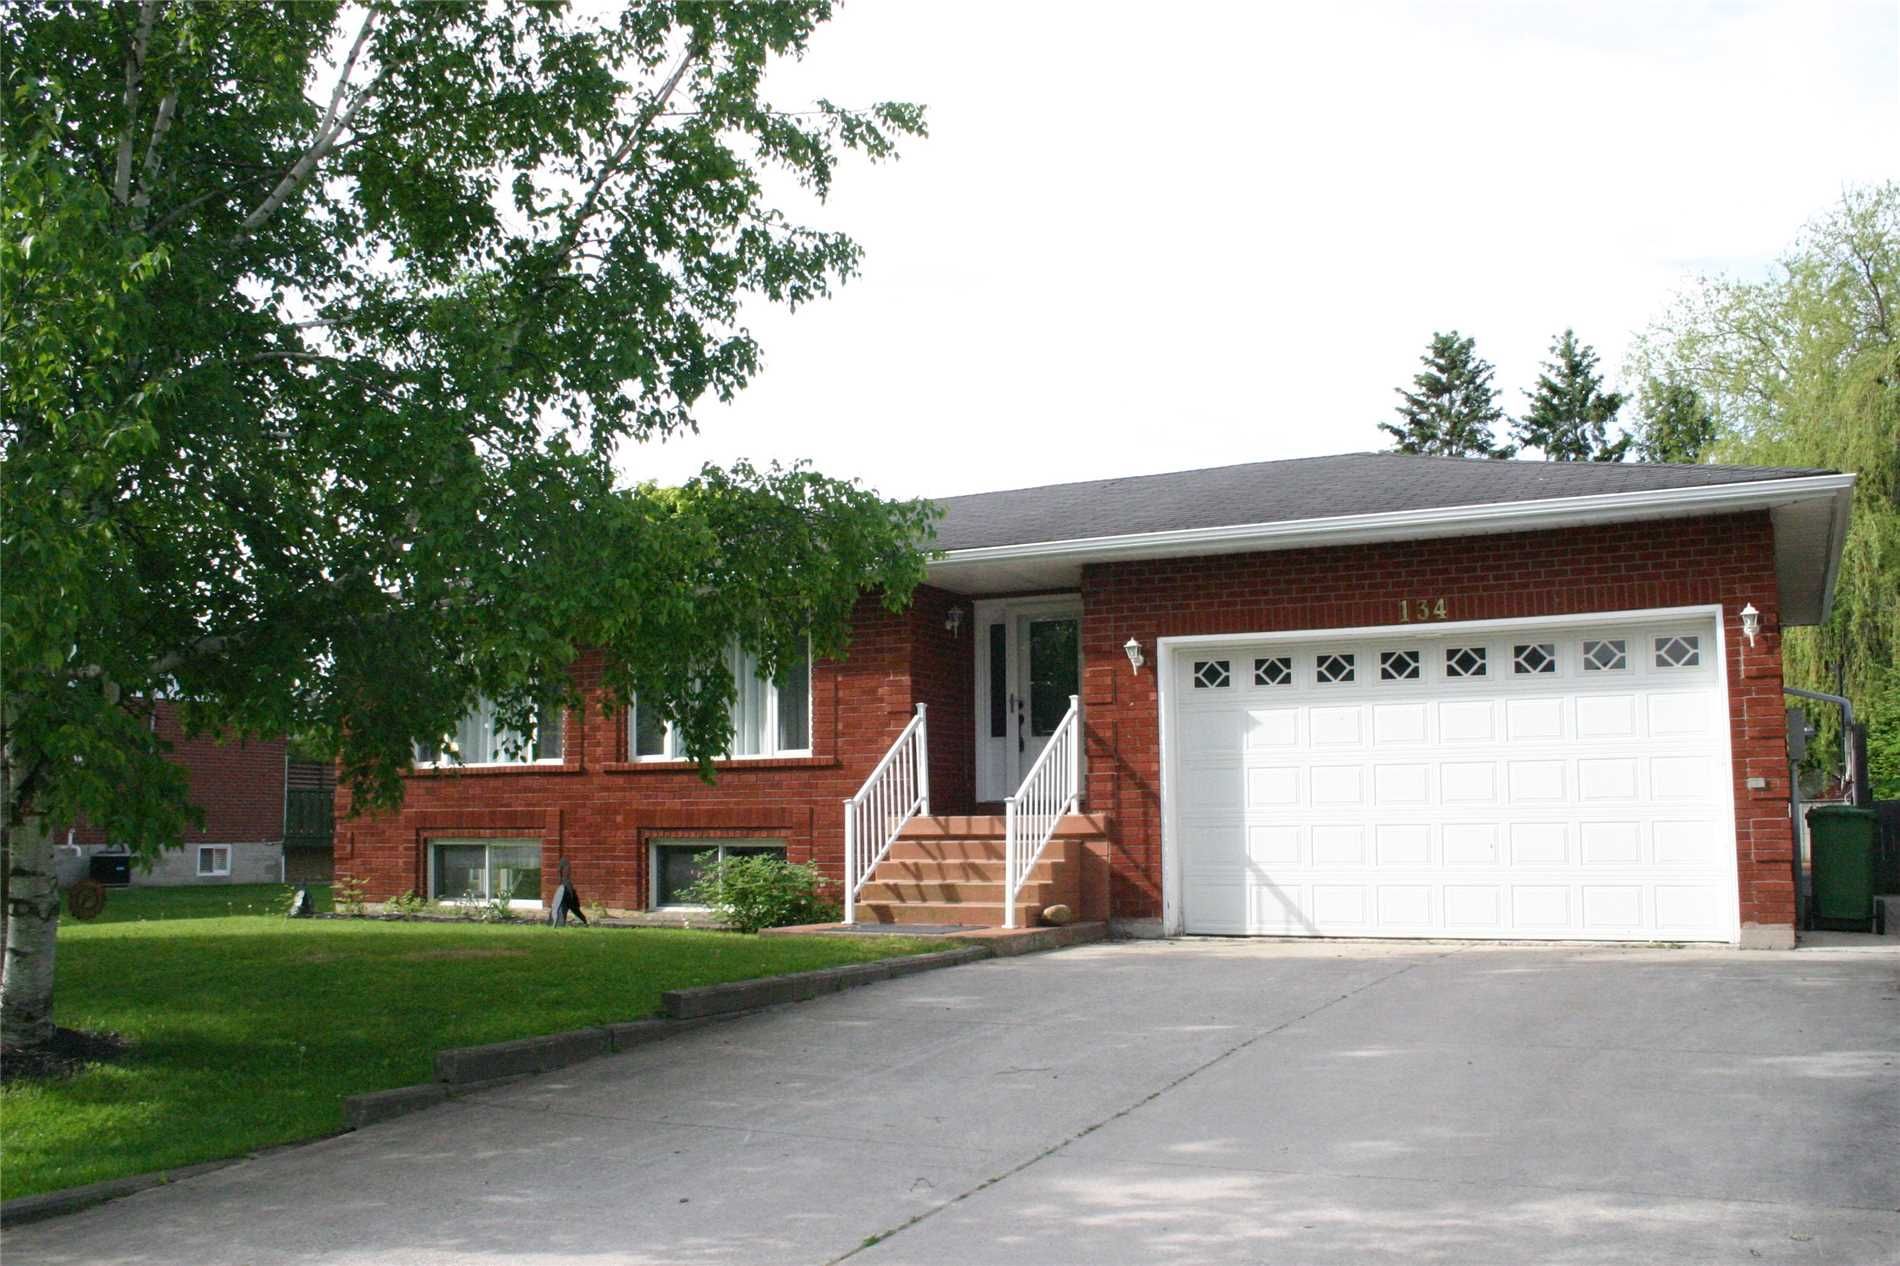 Main Photo: 134 N Osprey Street in Southgate: Dundalk House (Bungalow) for sale : MLS®# X4442887